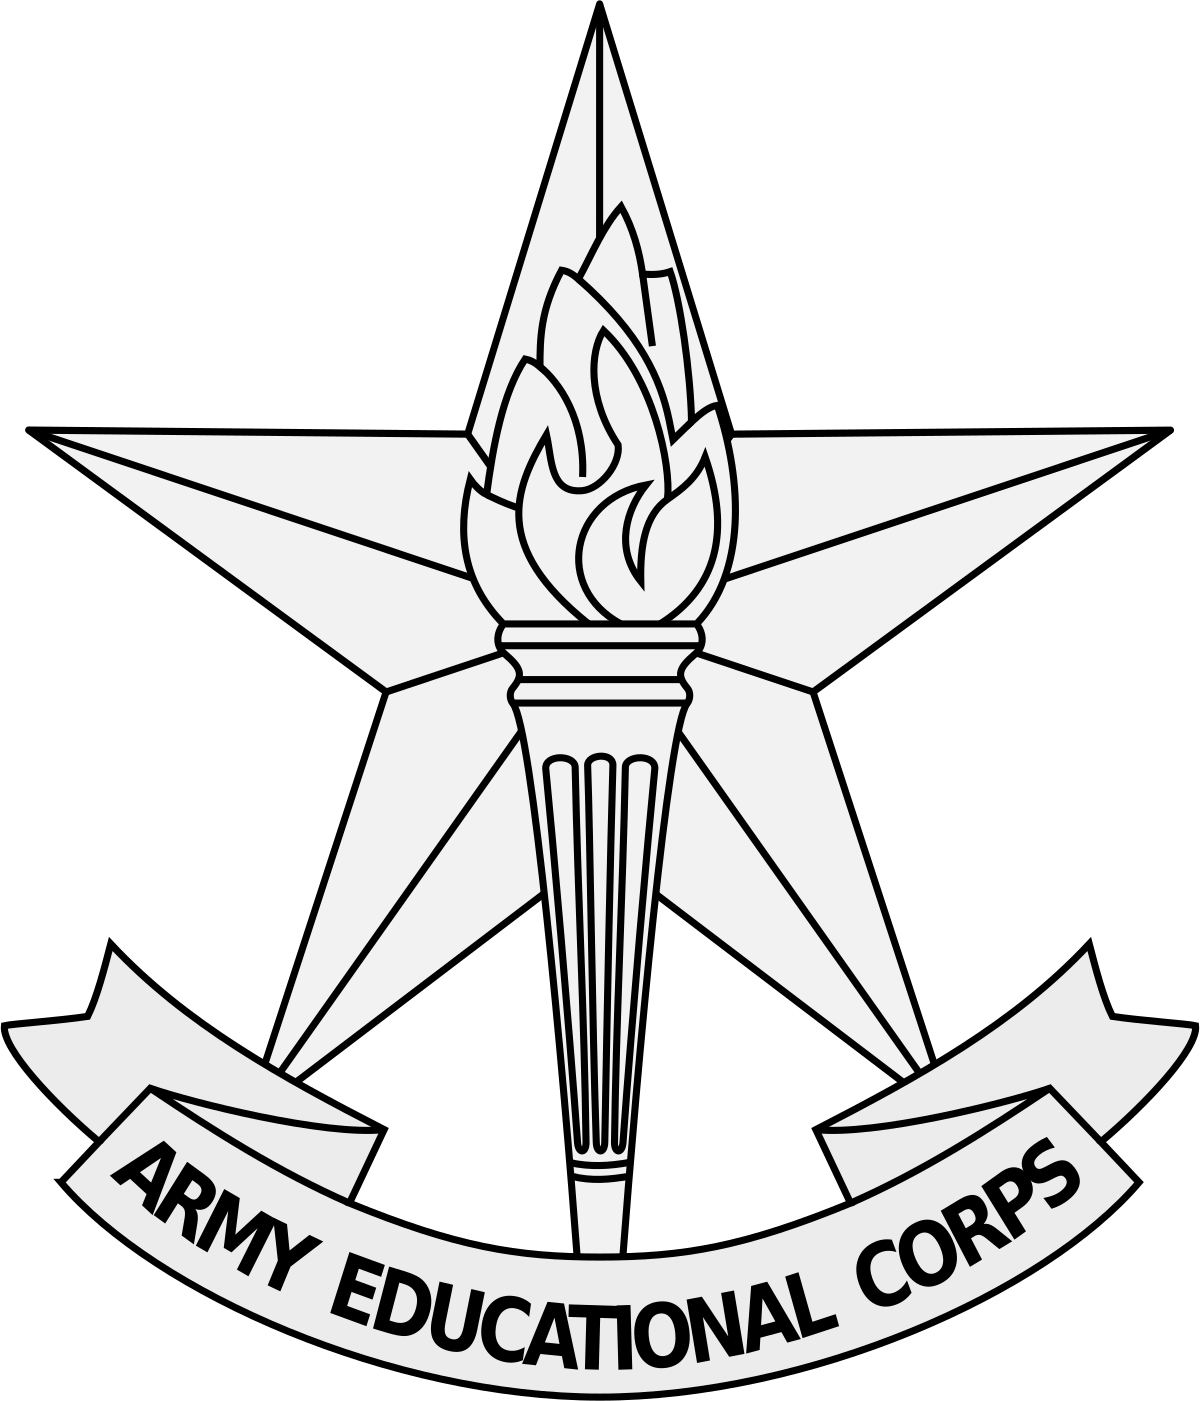 Army Education Corps (India) - Wikipedia